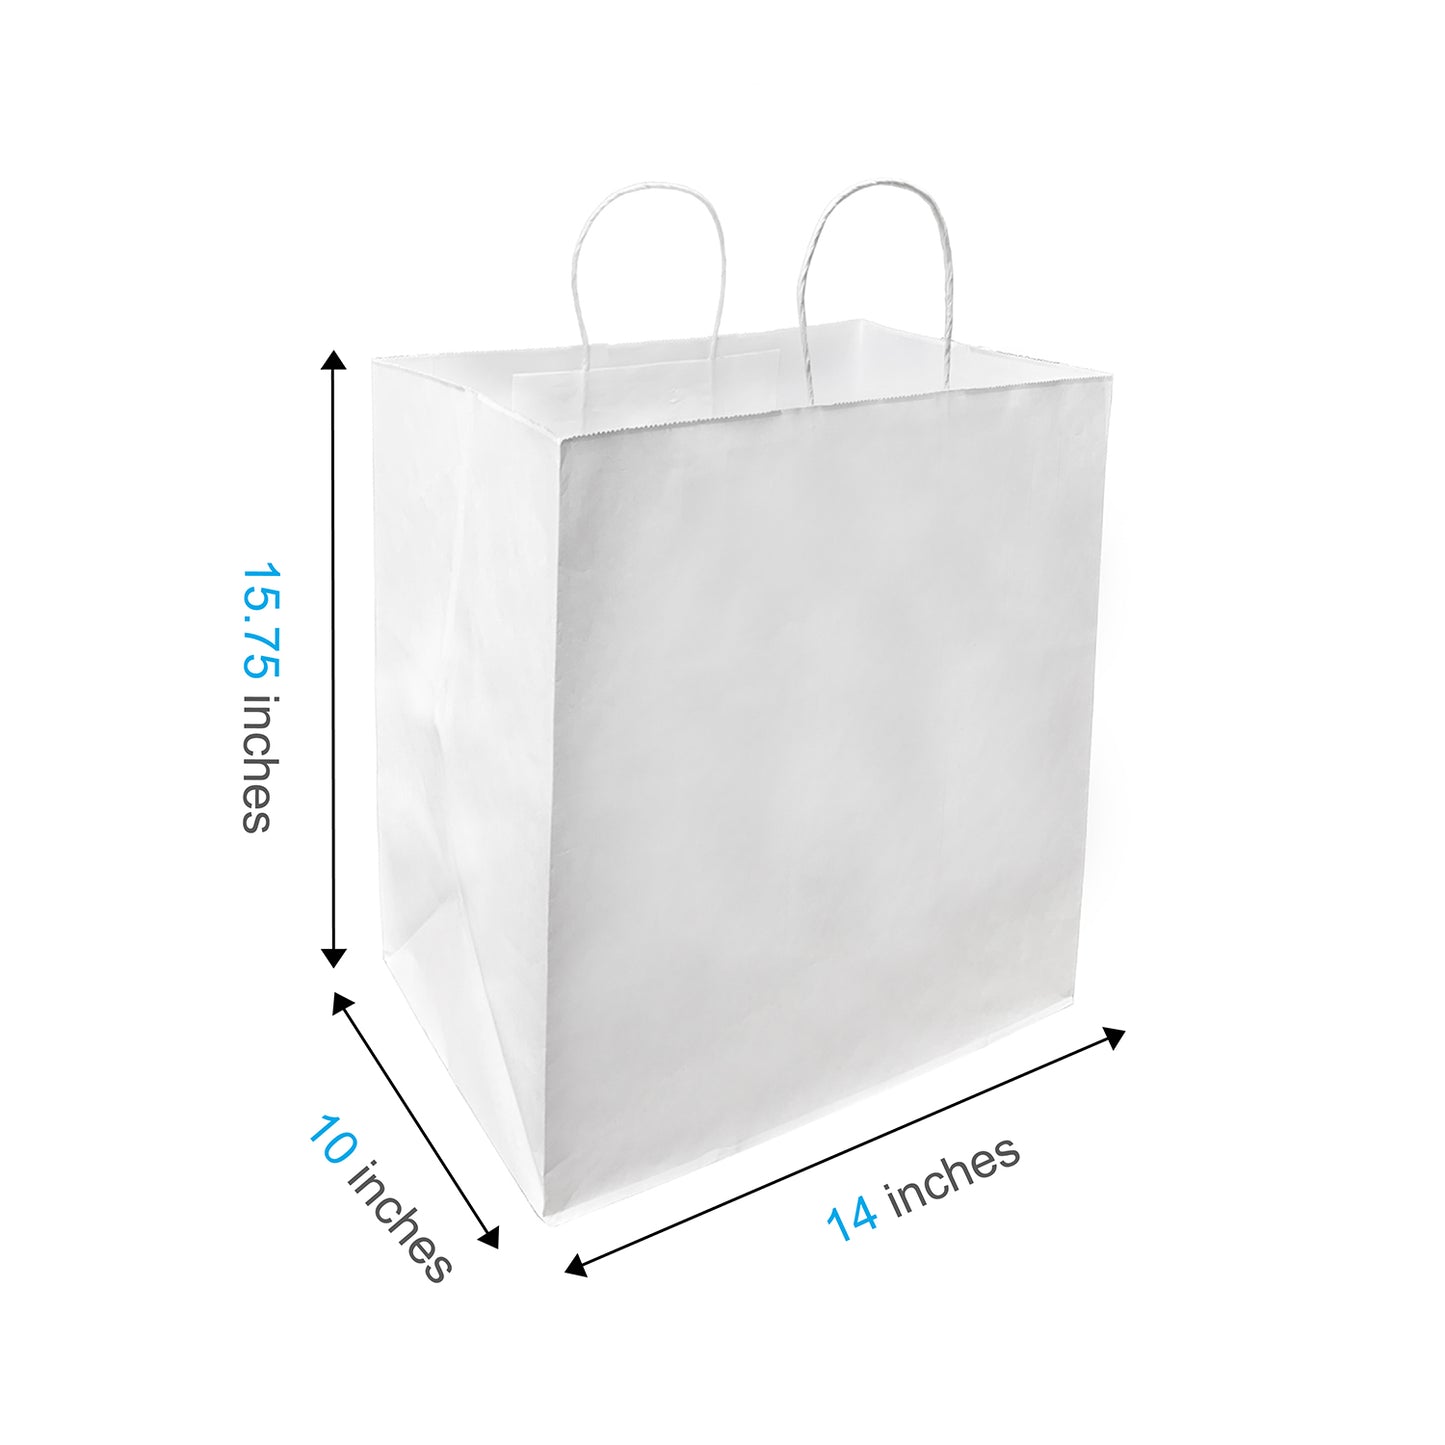 200 Pcs, Super Royal,  14x10x15.75 inches, White Kraft Paper Bags, with Twisted handle